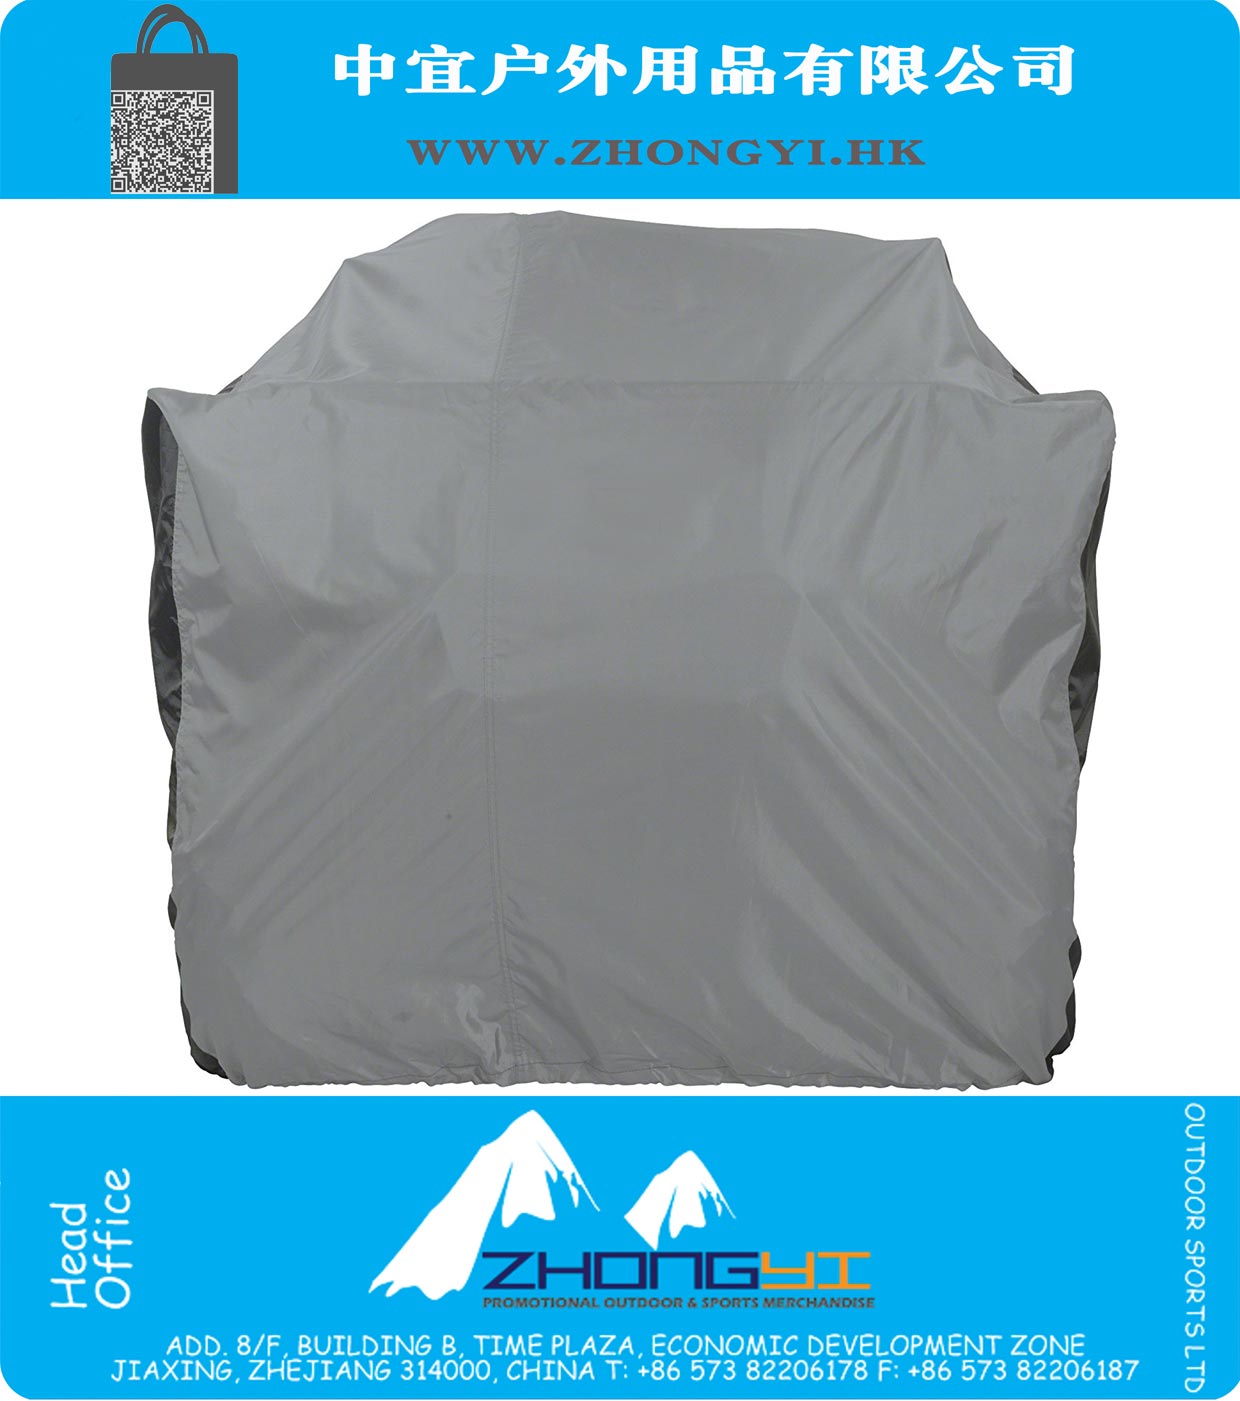 Durable ProtekX2 fabric with water-resistant backing and exterior coating for great weather and abrasion protection Elastic cord hem for a fast, tight and secure fit Storage bag included One-year limited warranty